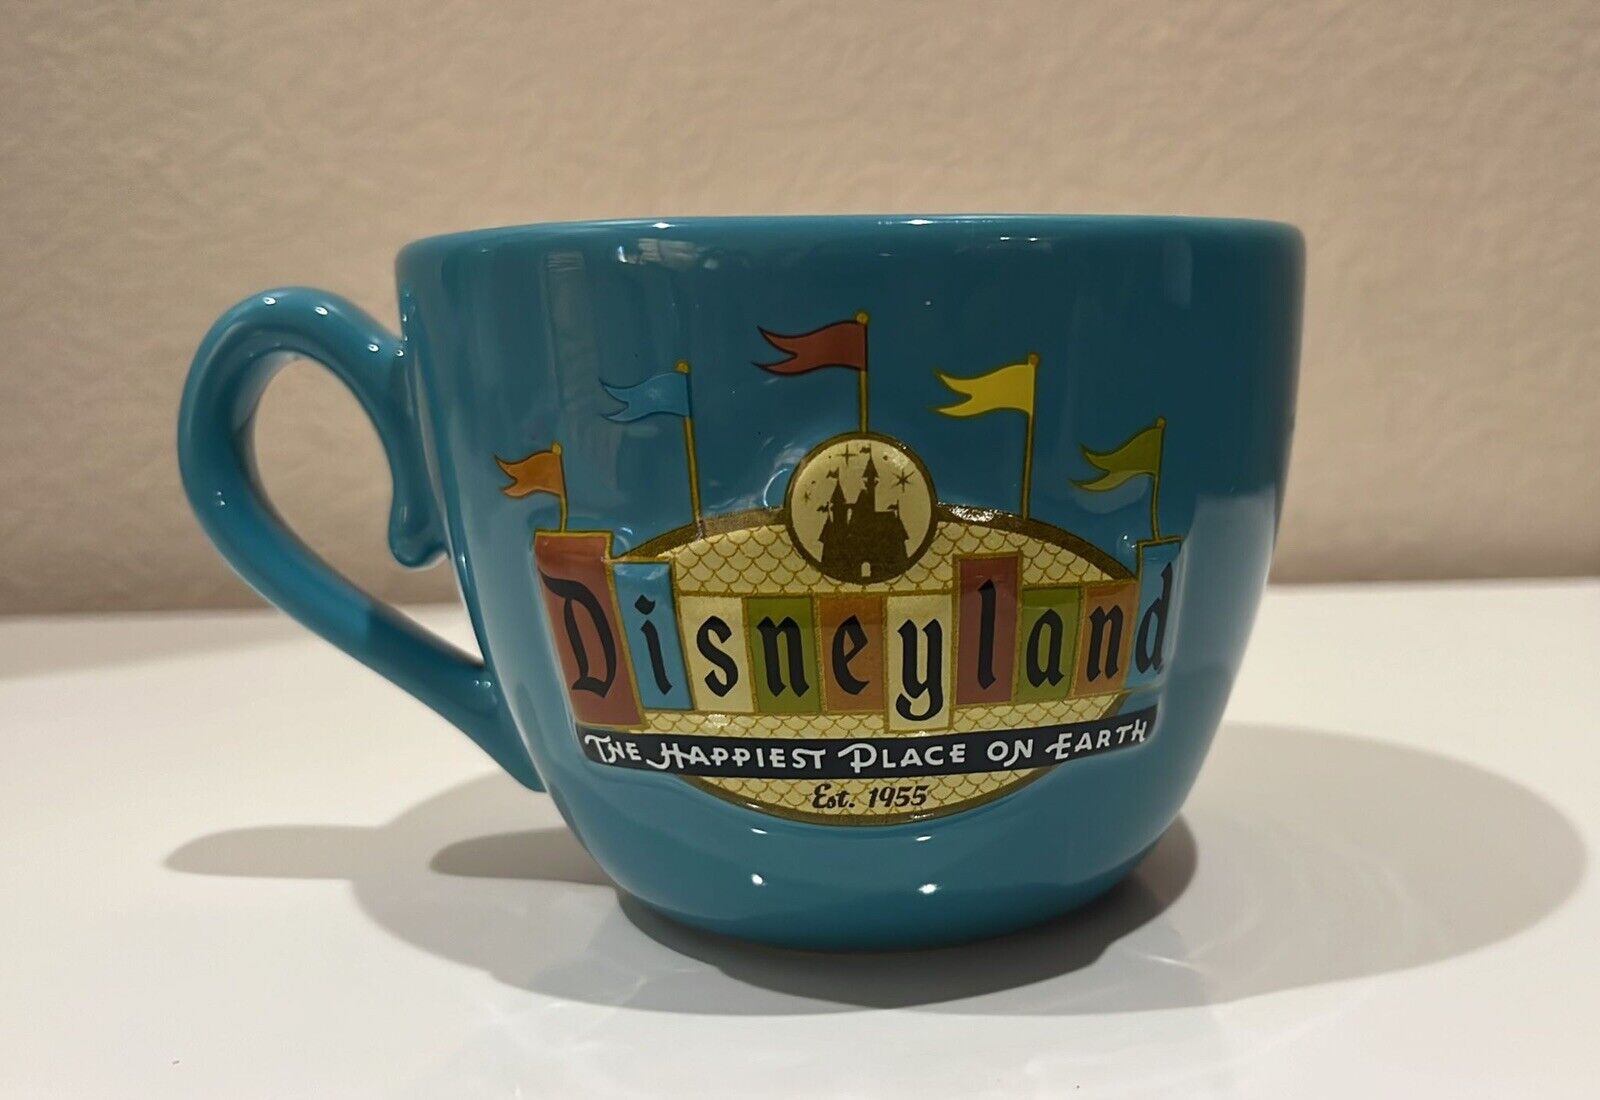 Disneyland “The Happiest Place on Earth” 50th Anniversary 3D Mug  Turquoise